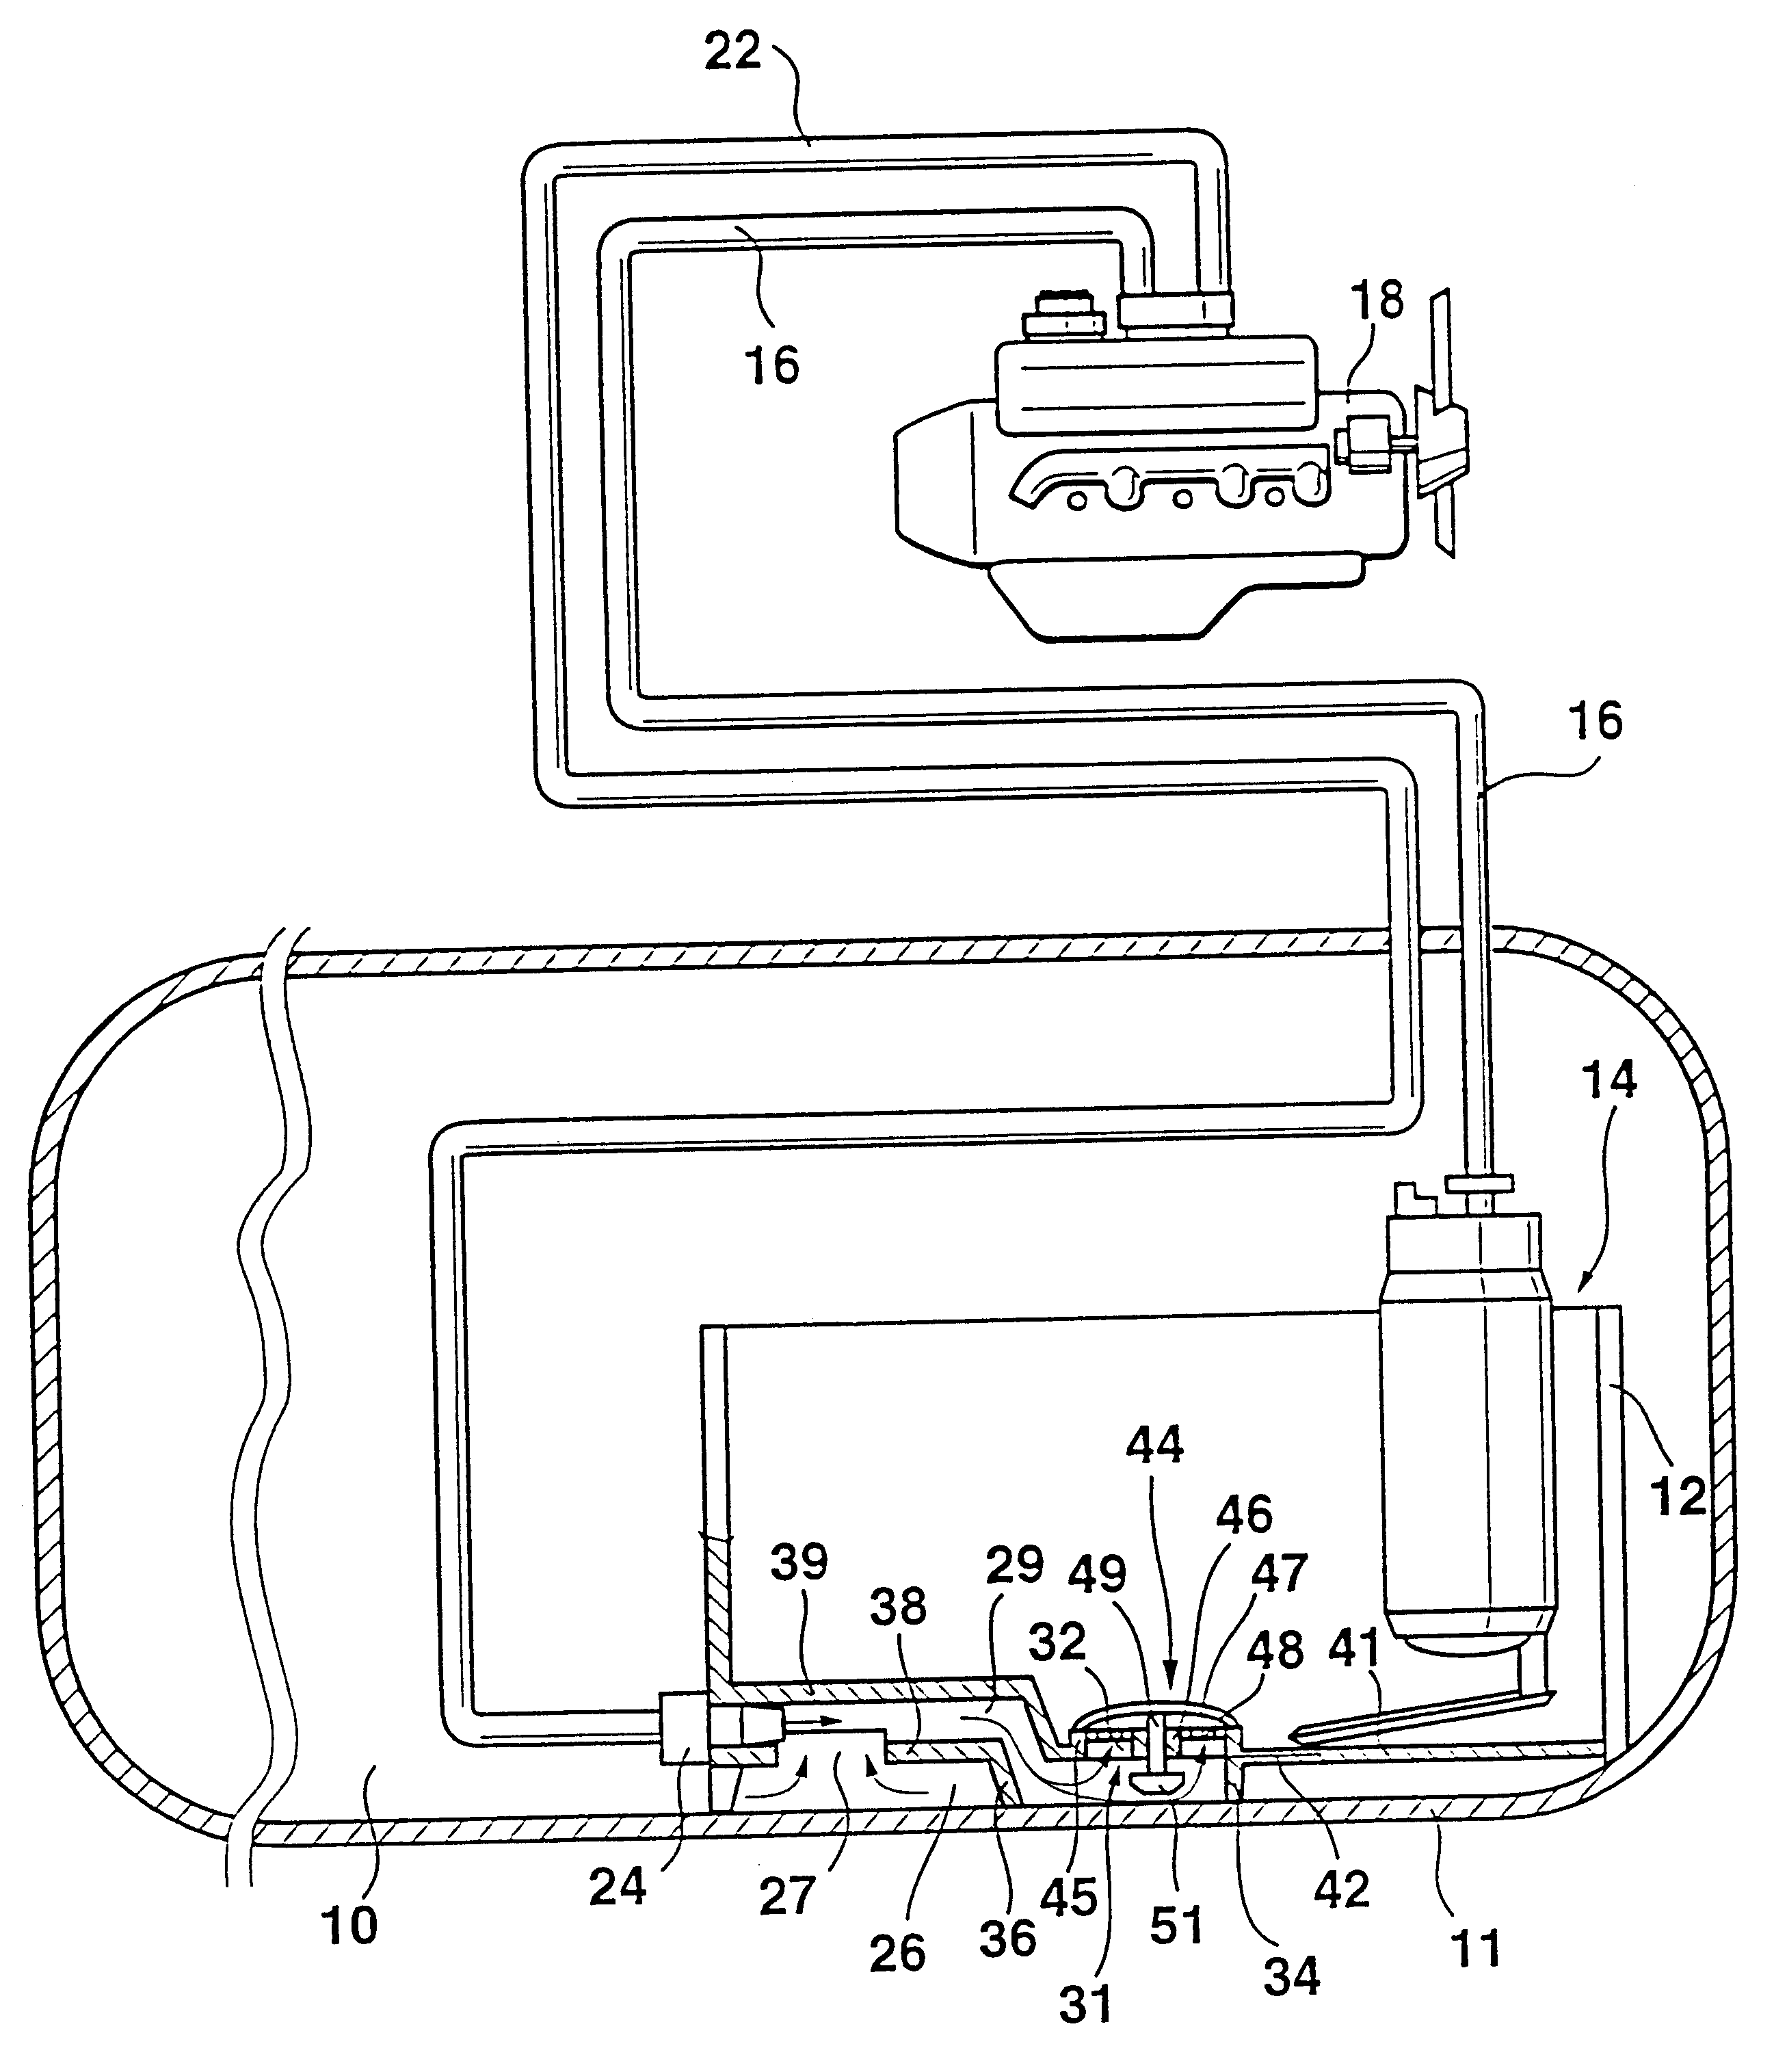 Device for conveying fuel from a reserve pot to the internal combustion engine of a motor vehicle